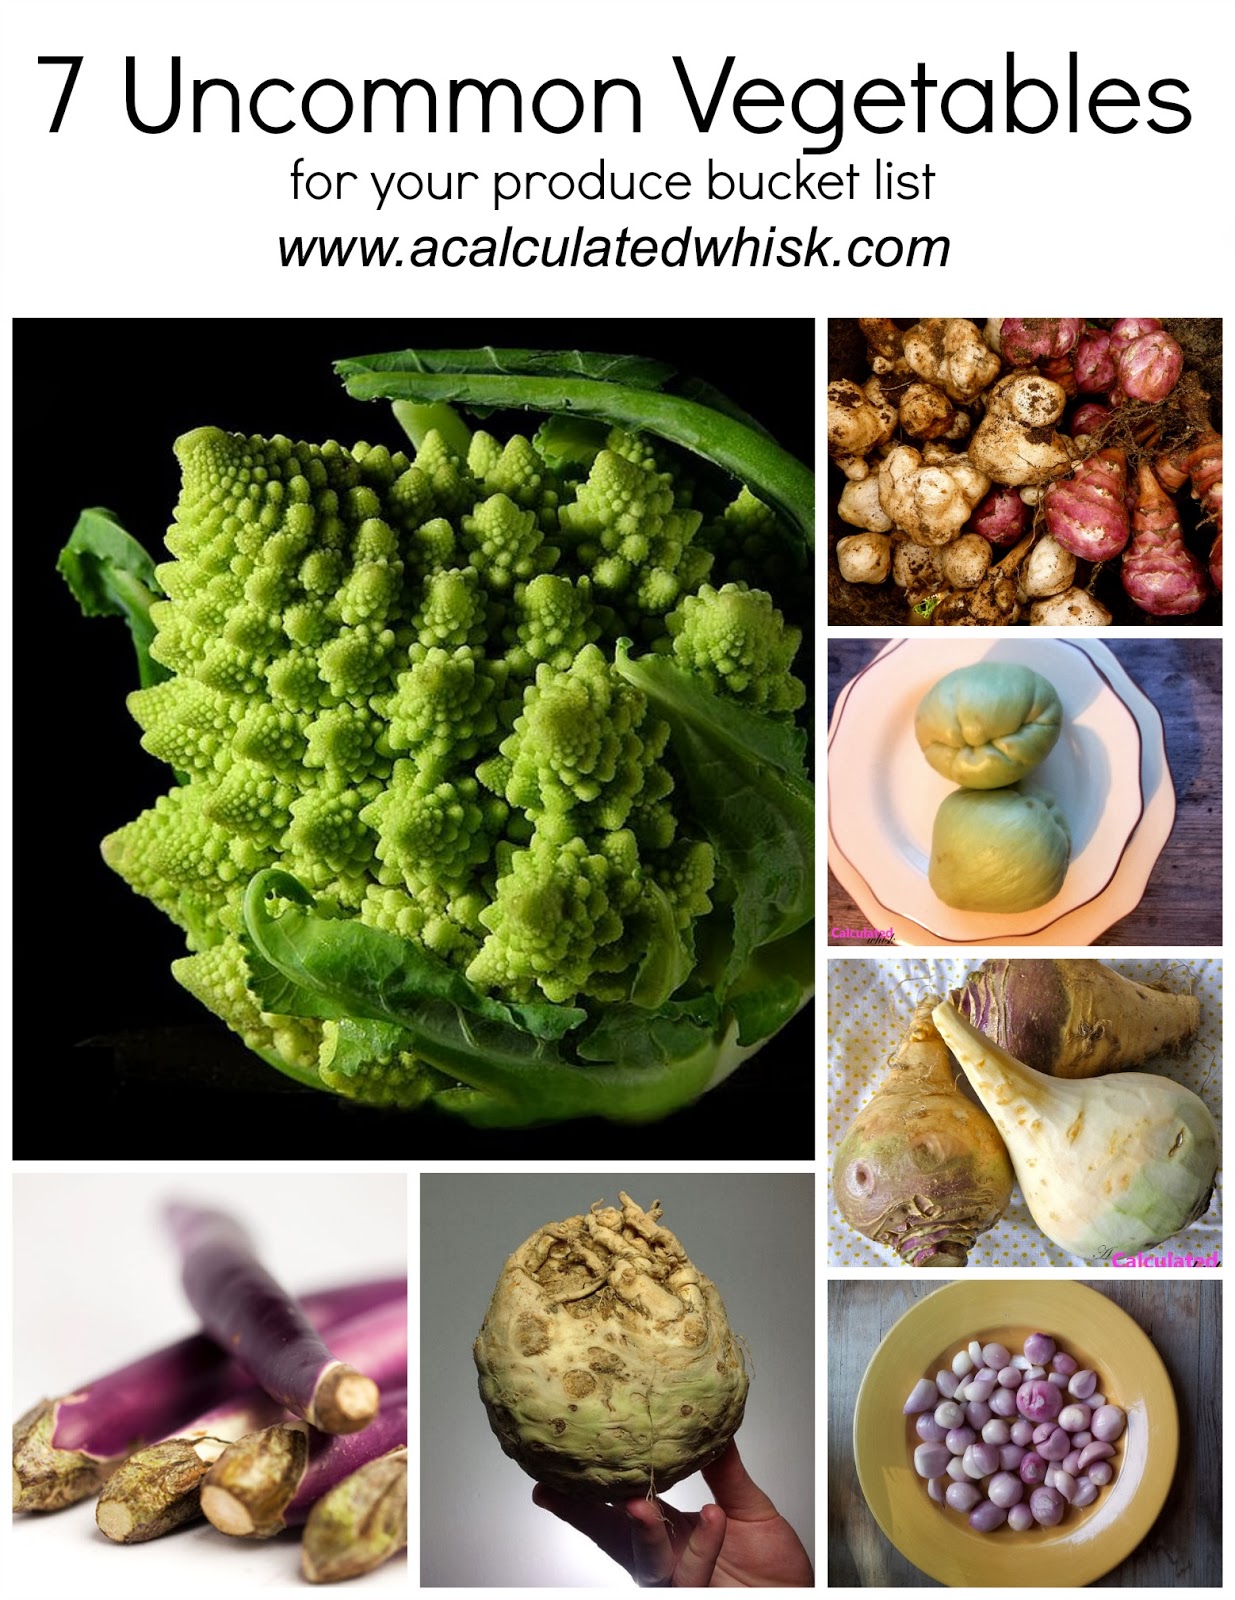 7 uncommon vegetables for your produce bucket list (whole30 day 25